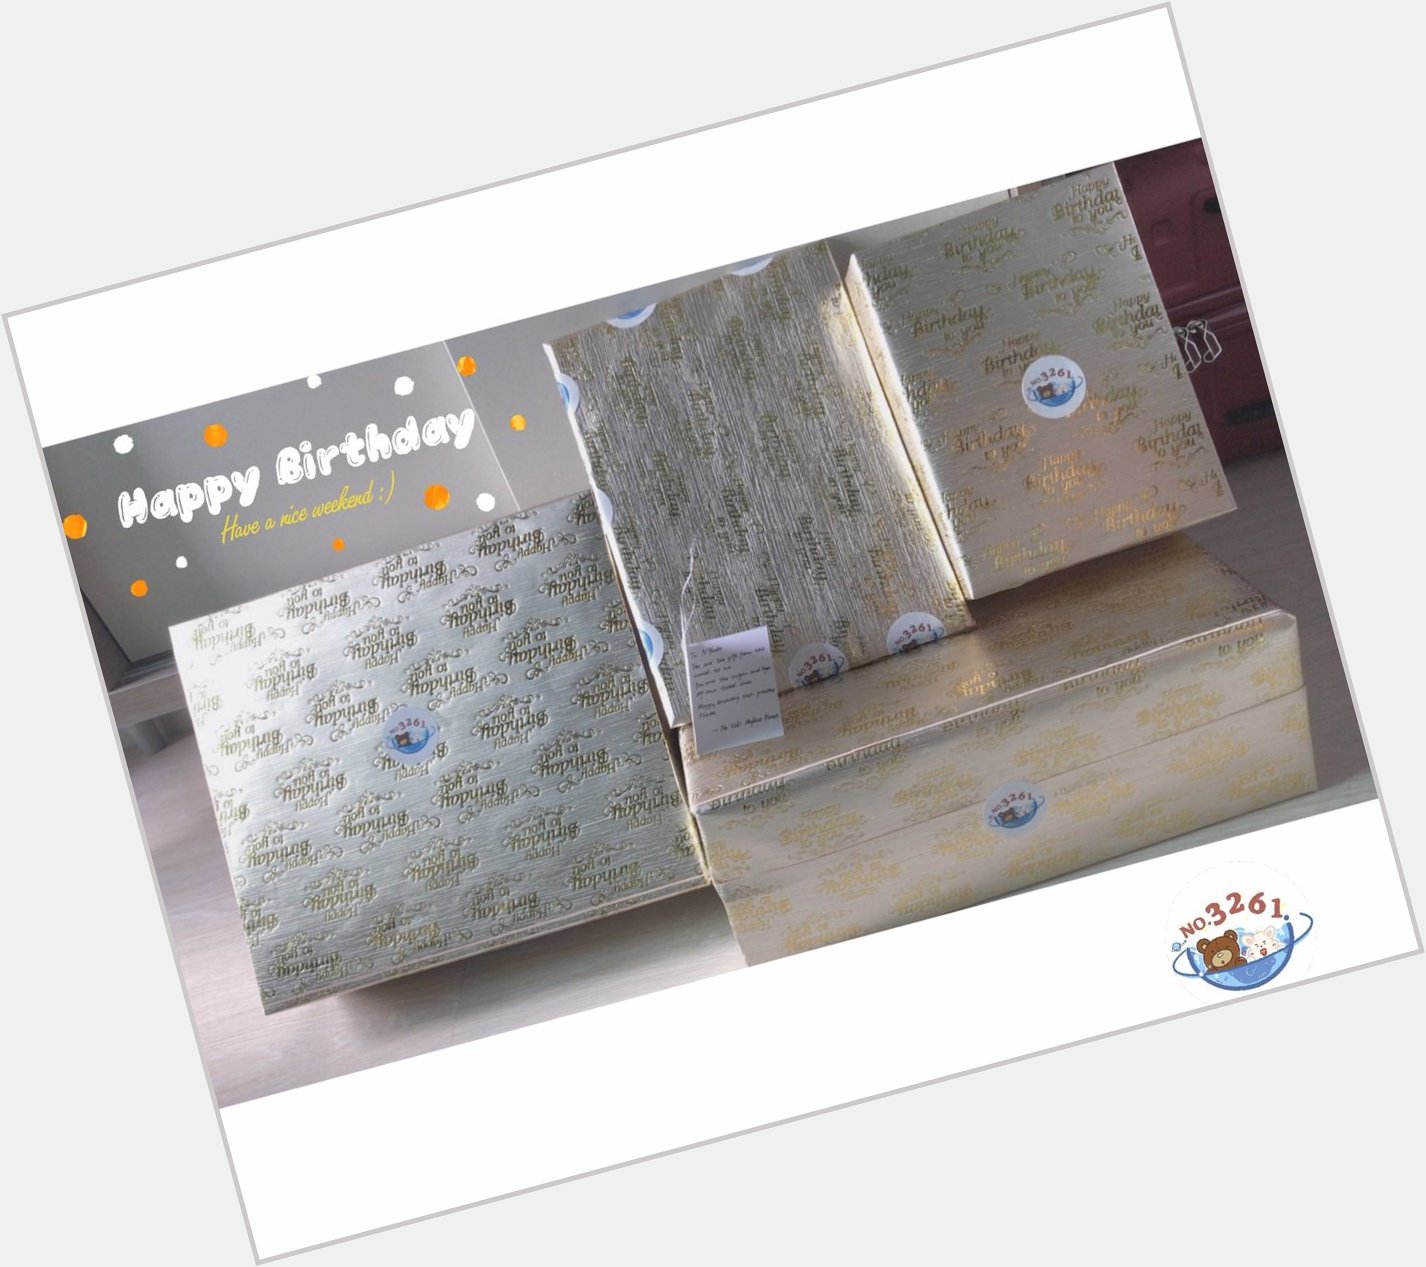 [3261 ]
Gifts from 3261 Planet Happy Birthday My little prince             ~  